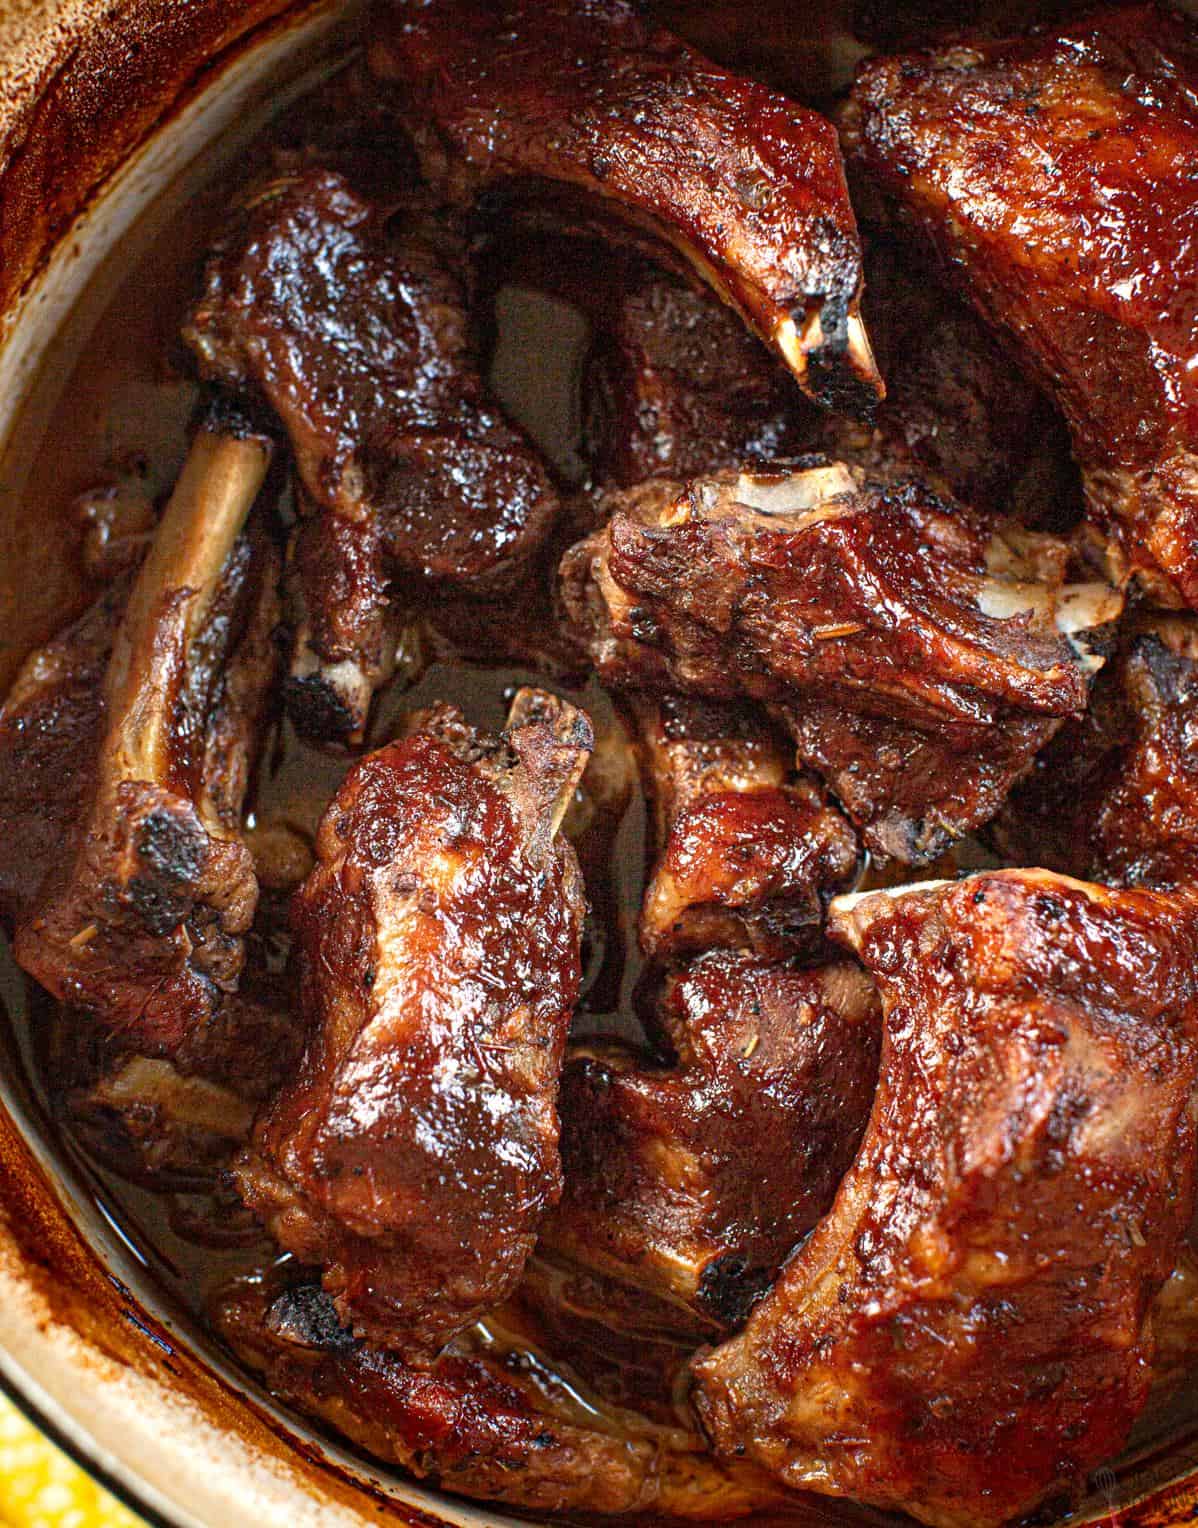  Enjoy a taste of summer with every bite of these mouth-watering BBQ pork spareribs.